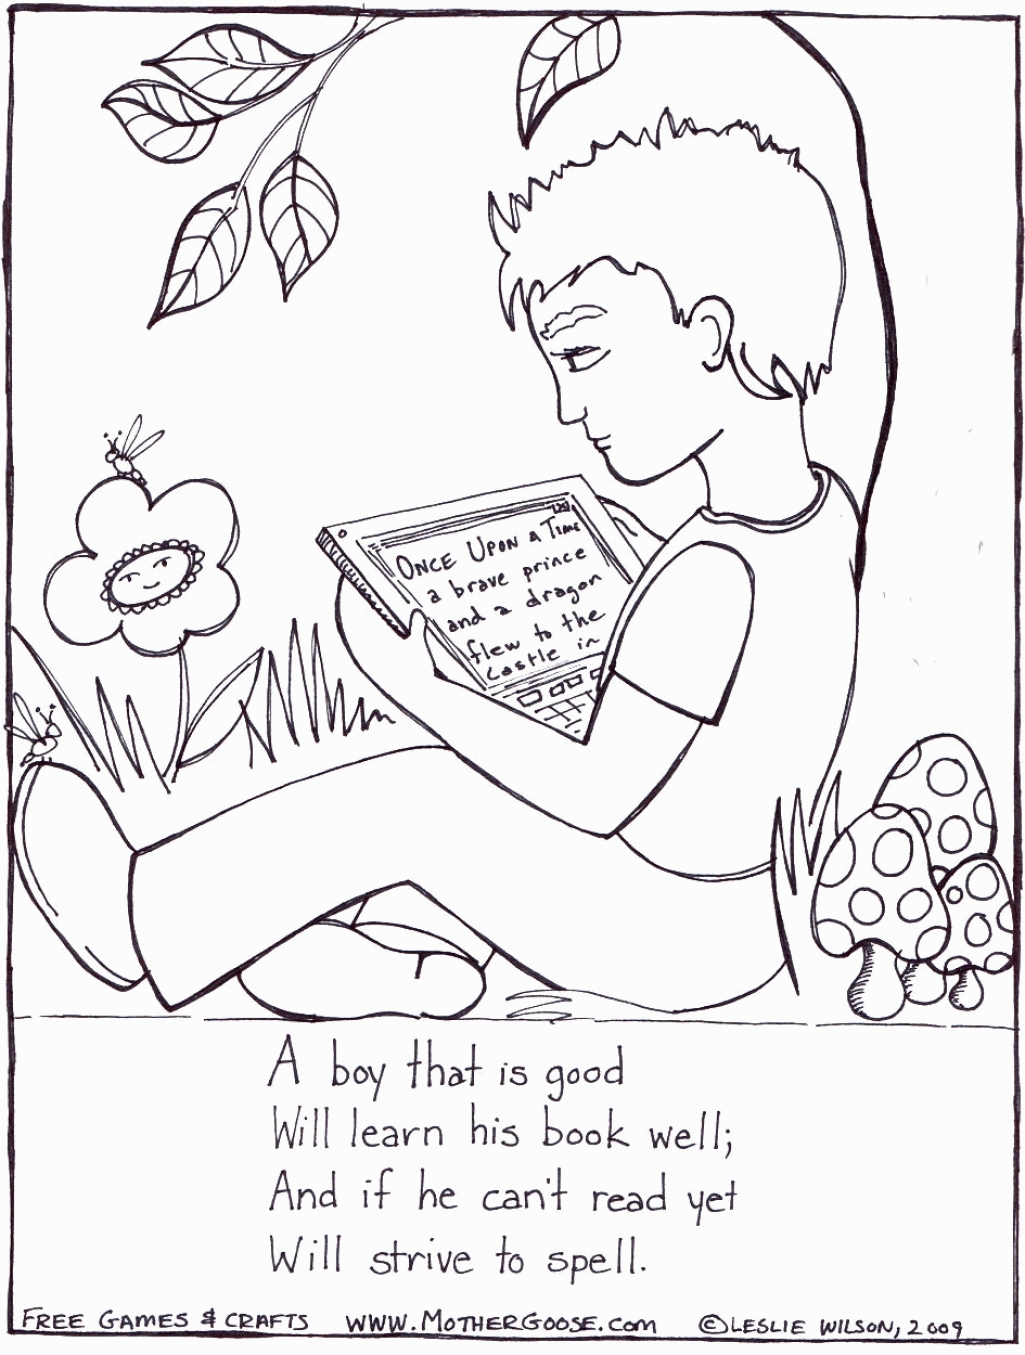 free-last-day-of-school-coloring-page-download-free-last-day-of-school